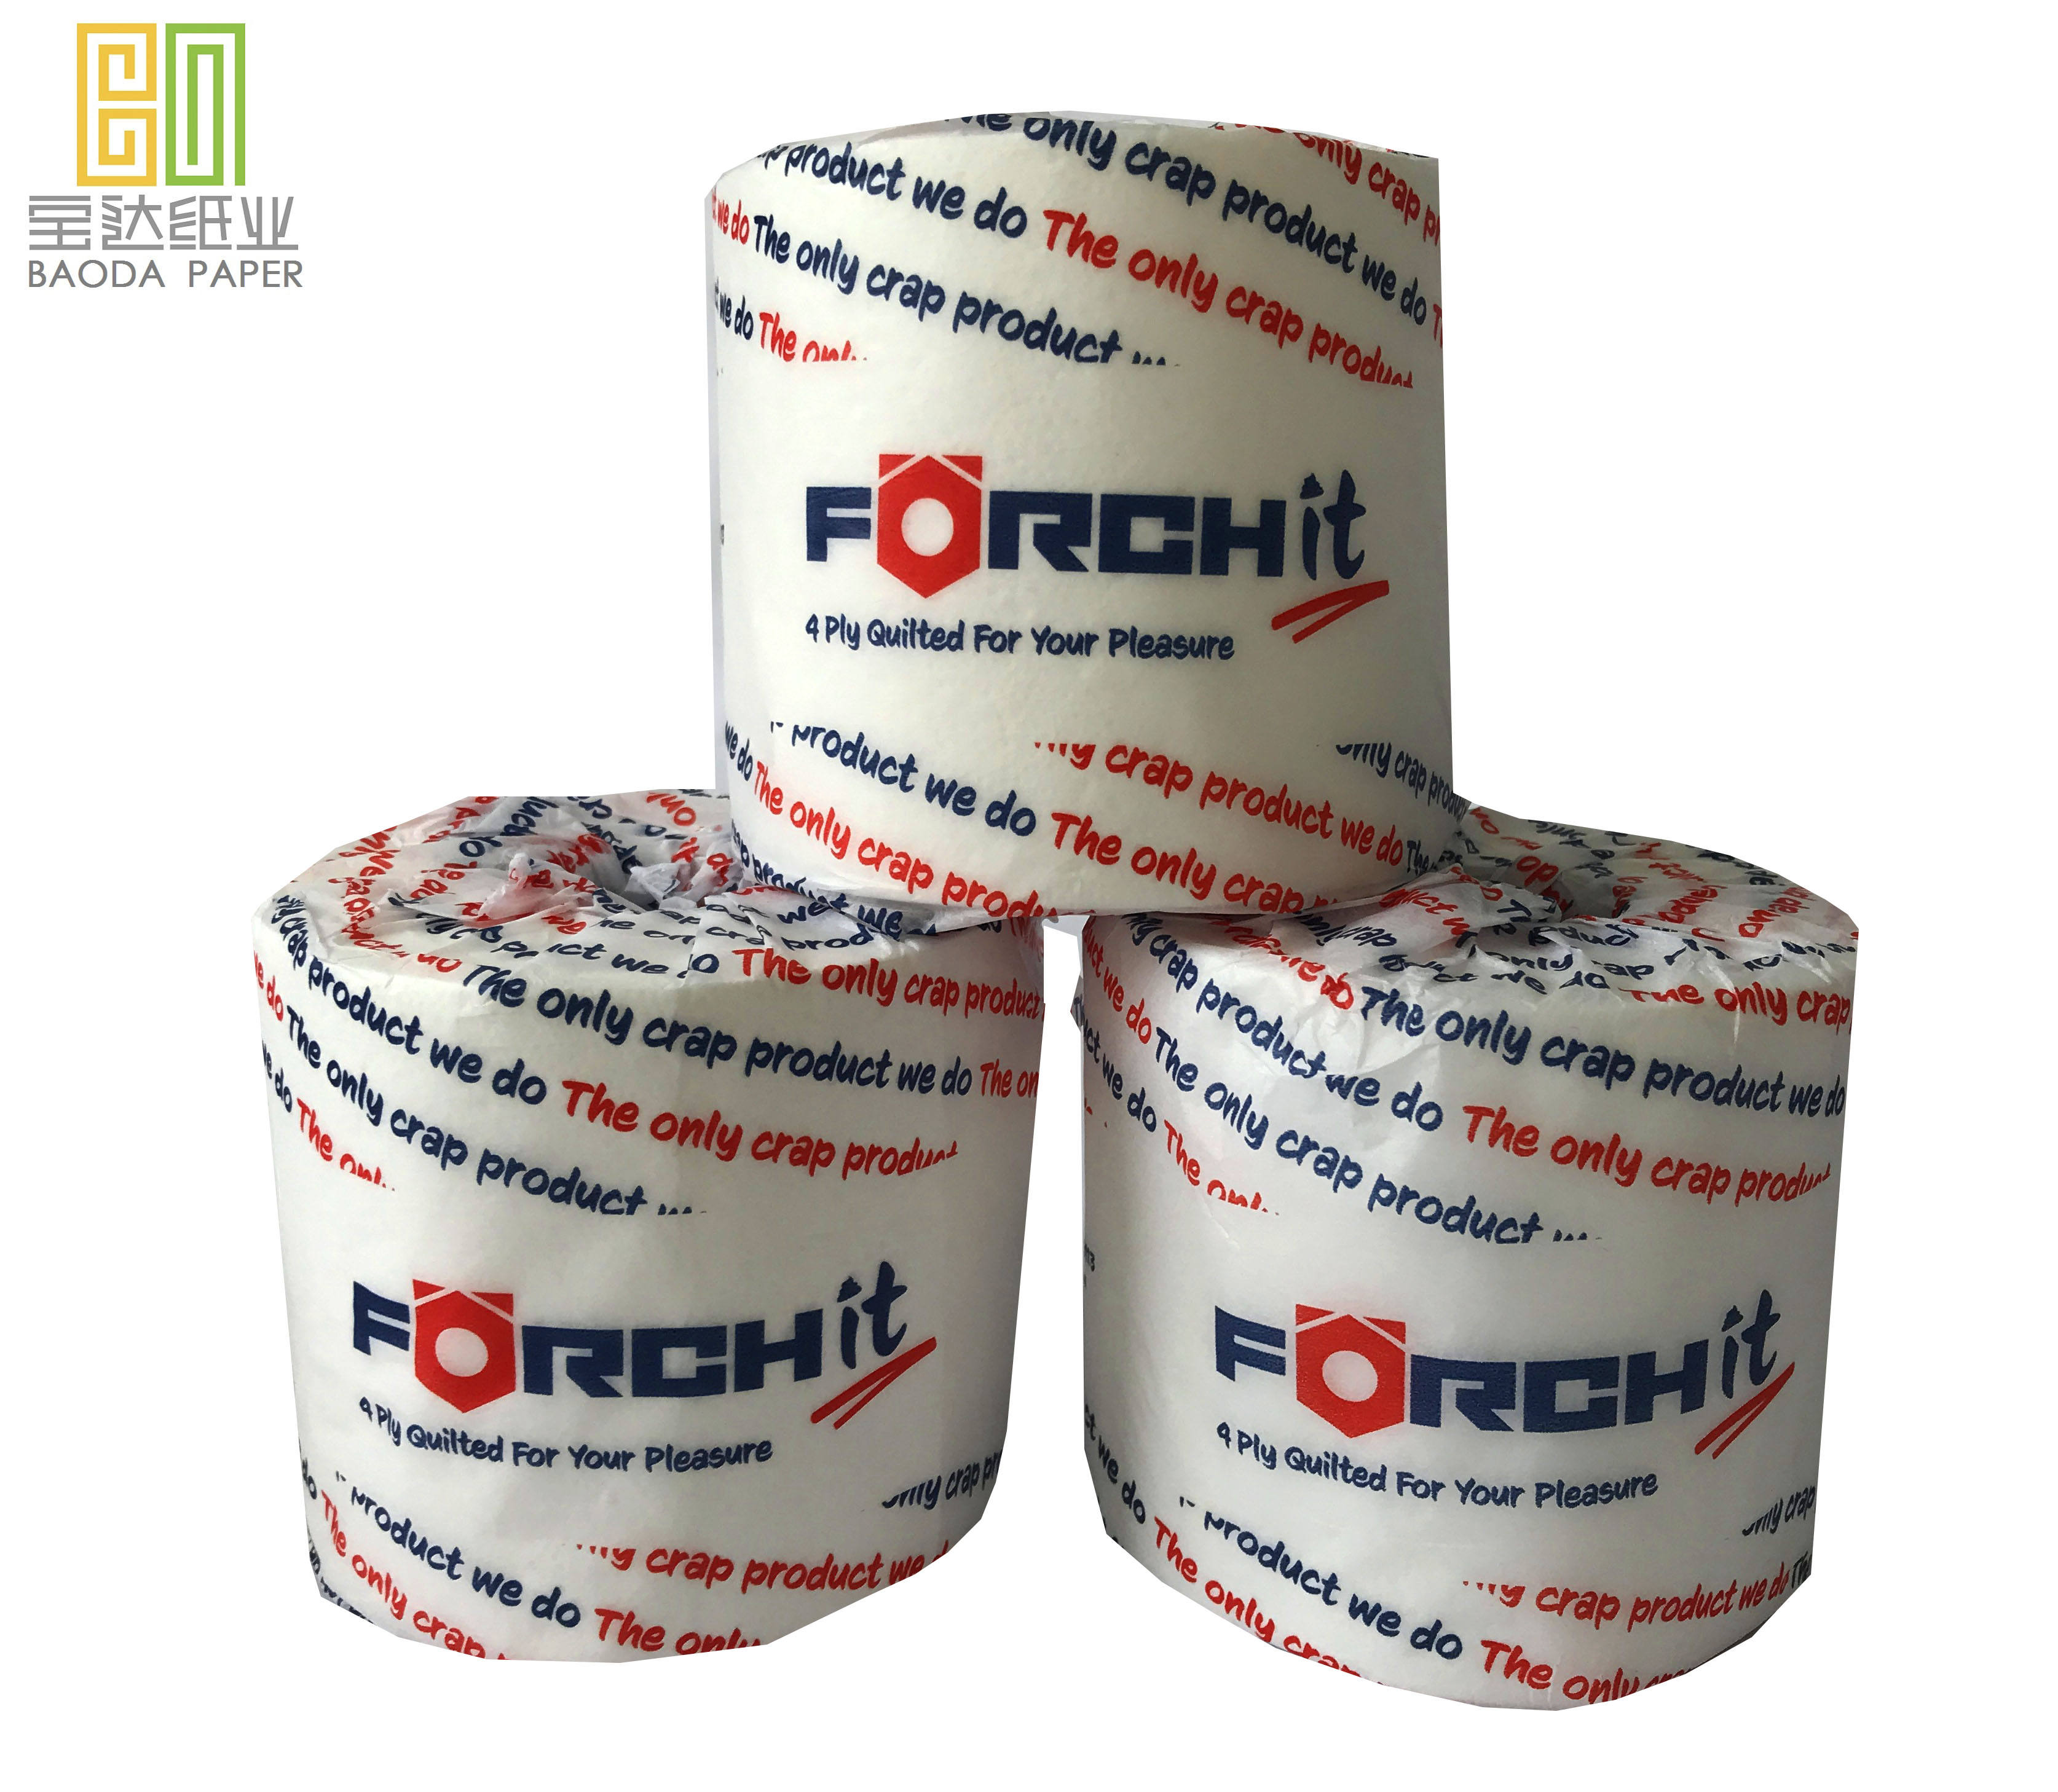 OEM Ultra Soft toilet paper tissue toilet paper roll 2ply 3ply 4ply personalized with good quality in Australia